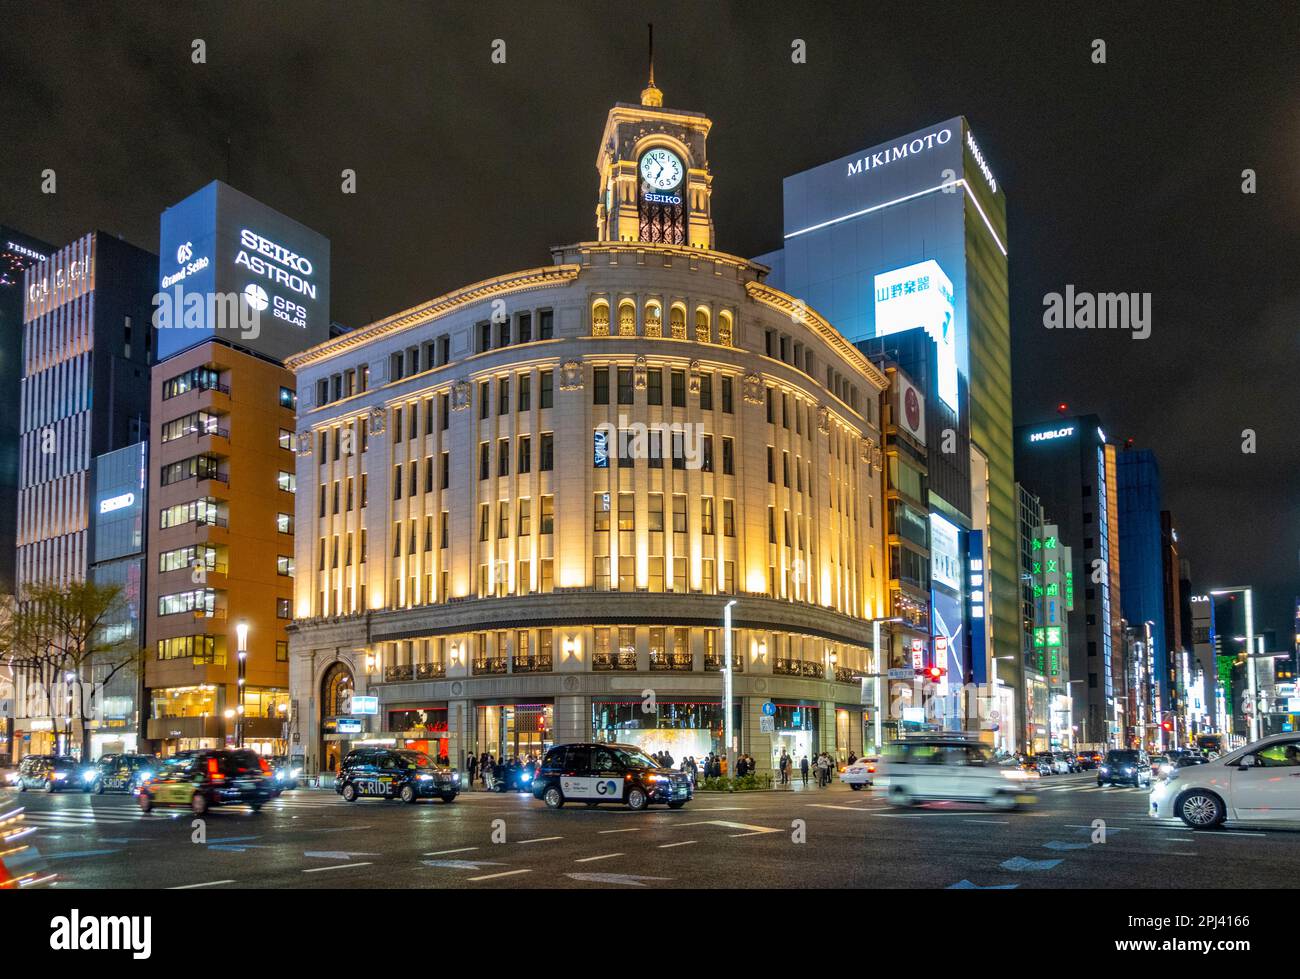 Exterior view at night of Wako department store in Ginza, Tokyo, Japan Stock Photo